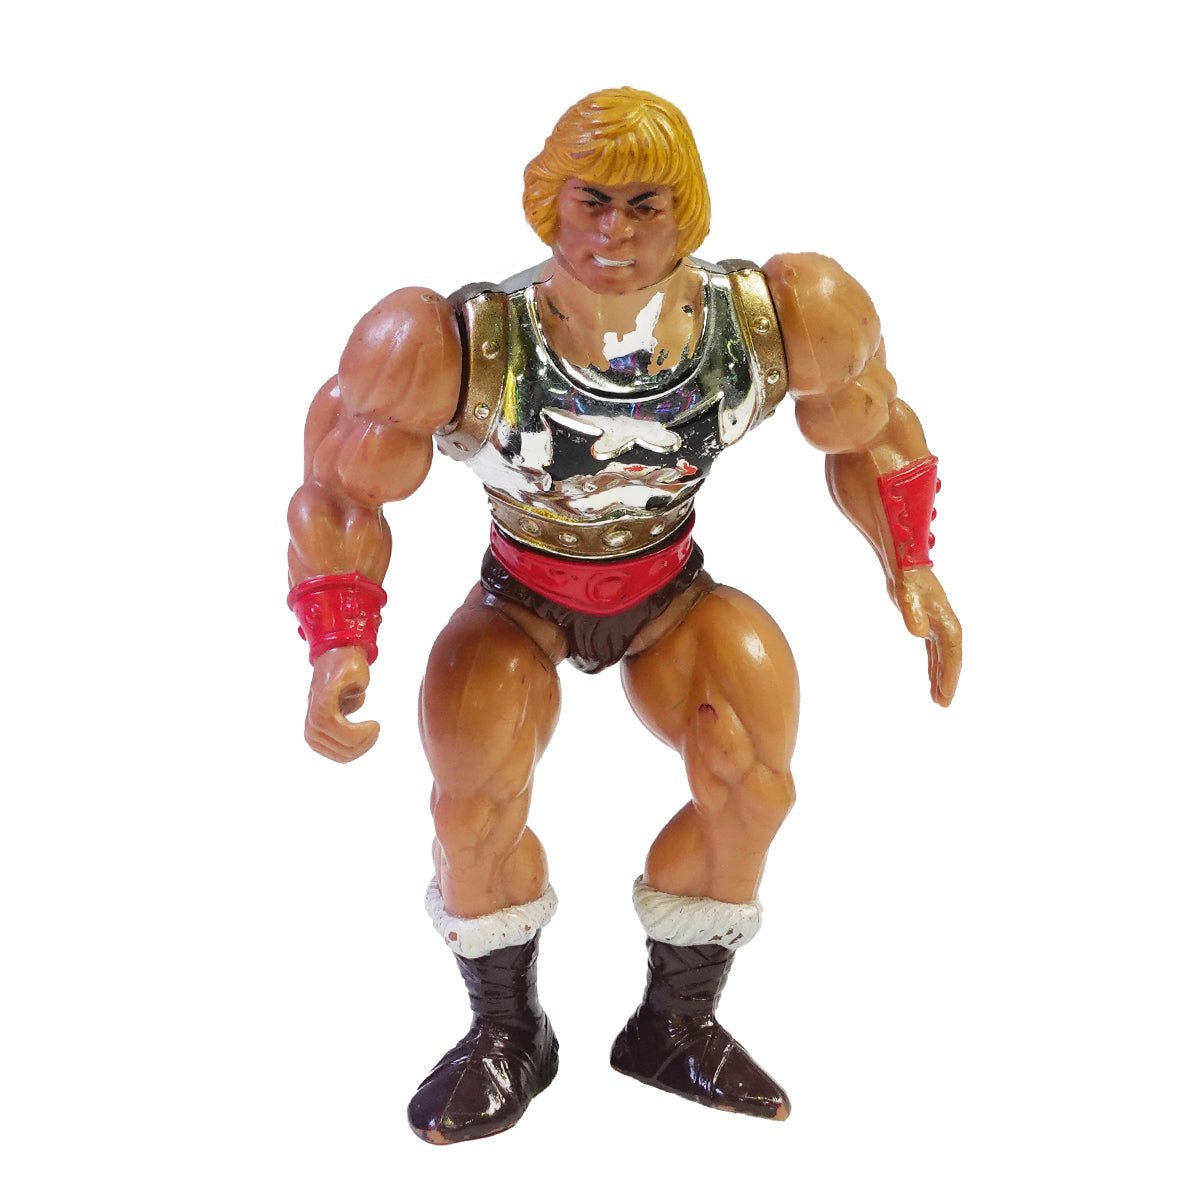 (Pre-Owned) Figurines - He Man and Tiger - دمية - Store 974 | ستور ٩٧٤